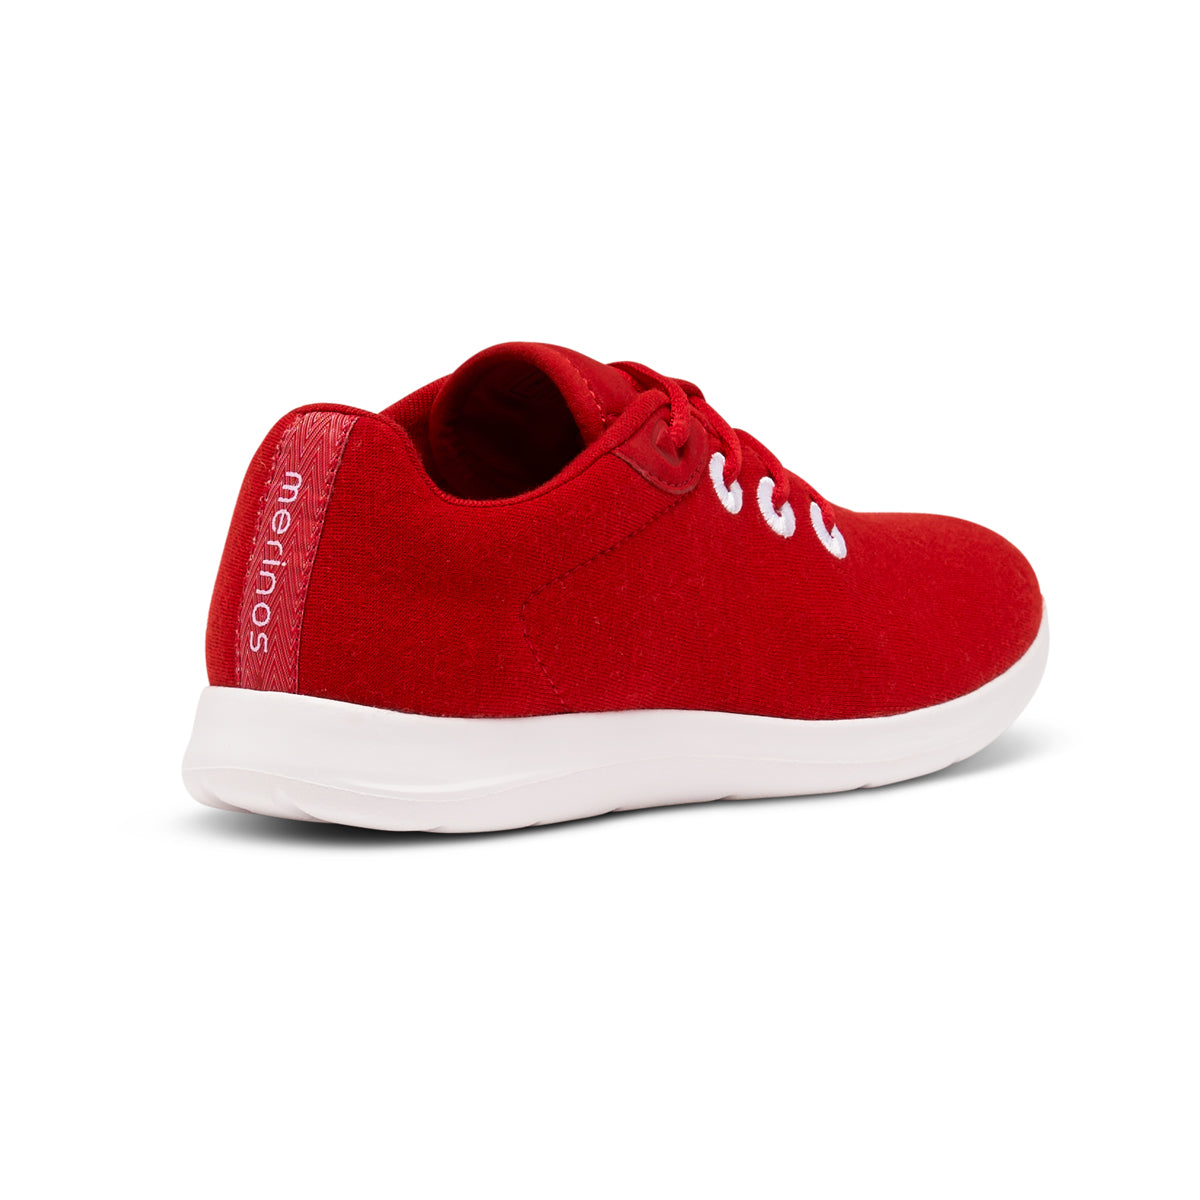 Women's Lace-Ups Red